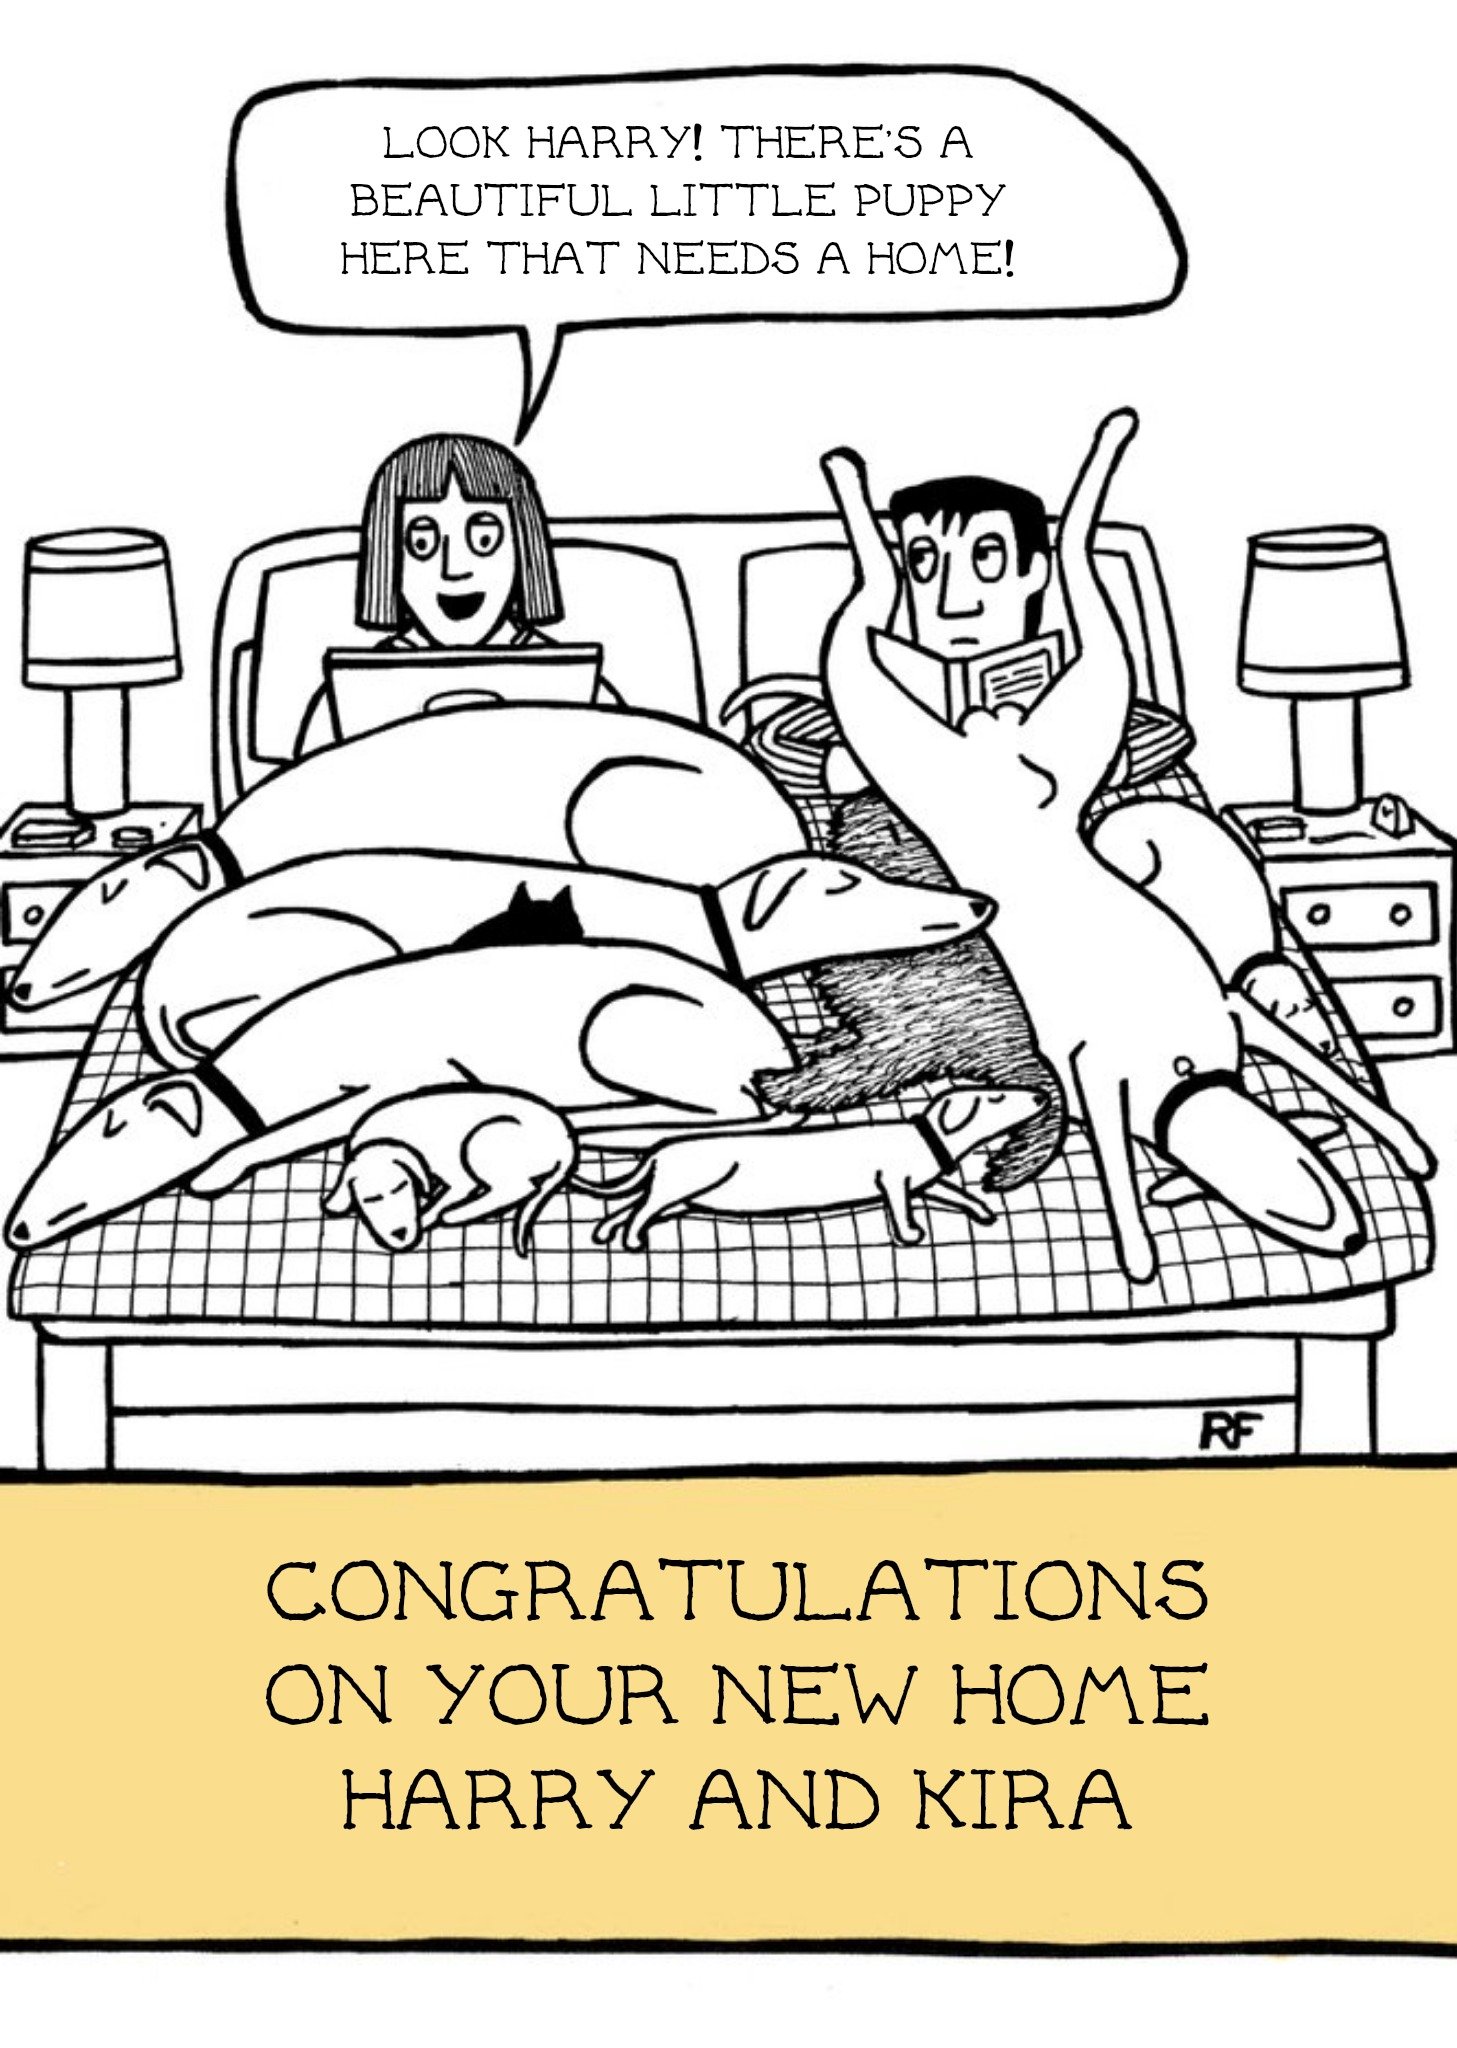 Moonpig Cartoon Puppies Congrats On Your New Home Card, Large